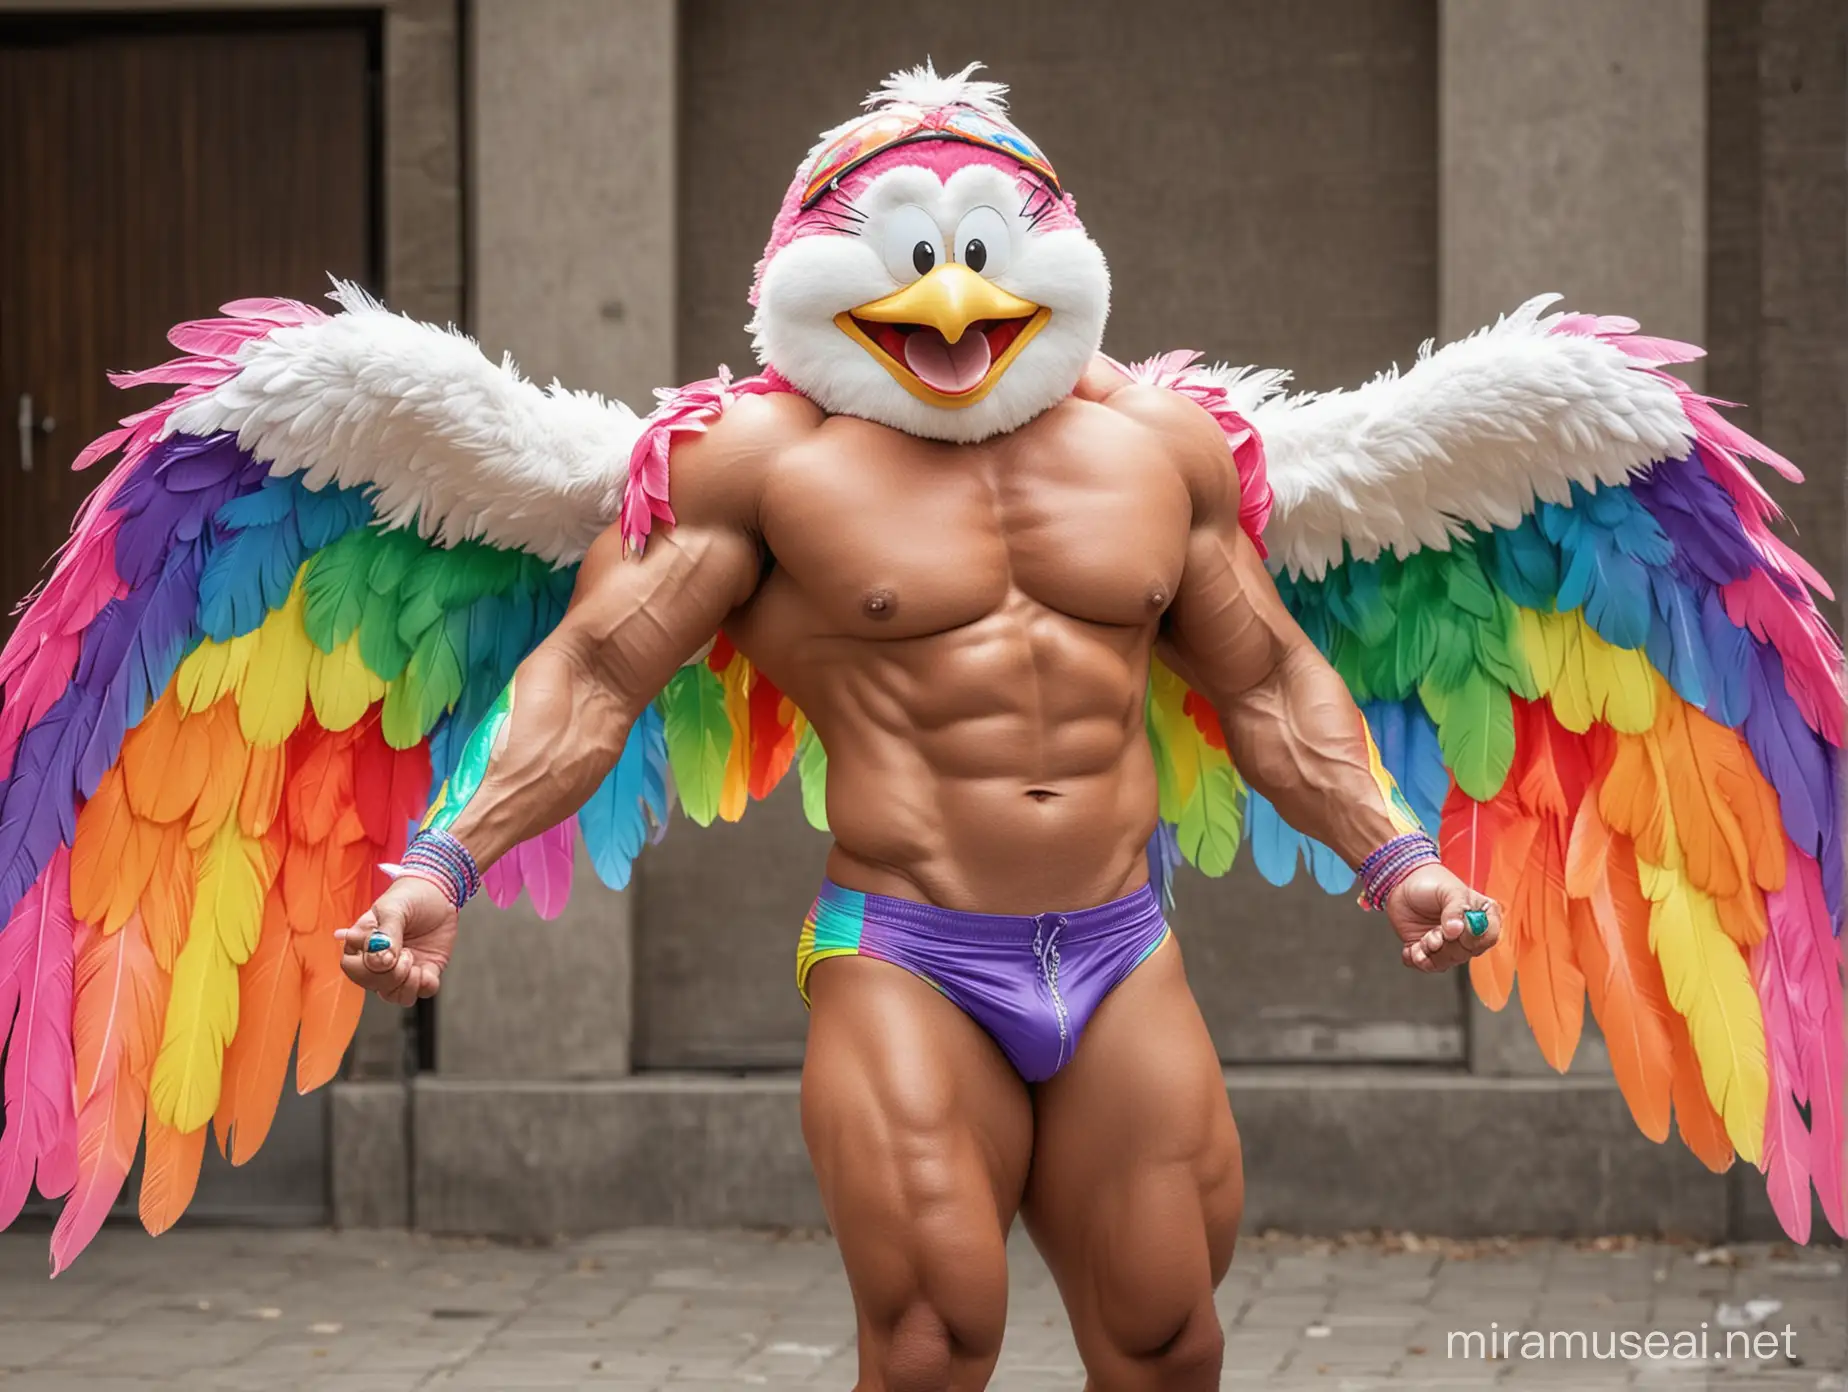 Ultra Beefy Bodybuilder Flexing with Bright Rainbow Coloured Wings Jacket and Doraemon